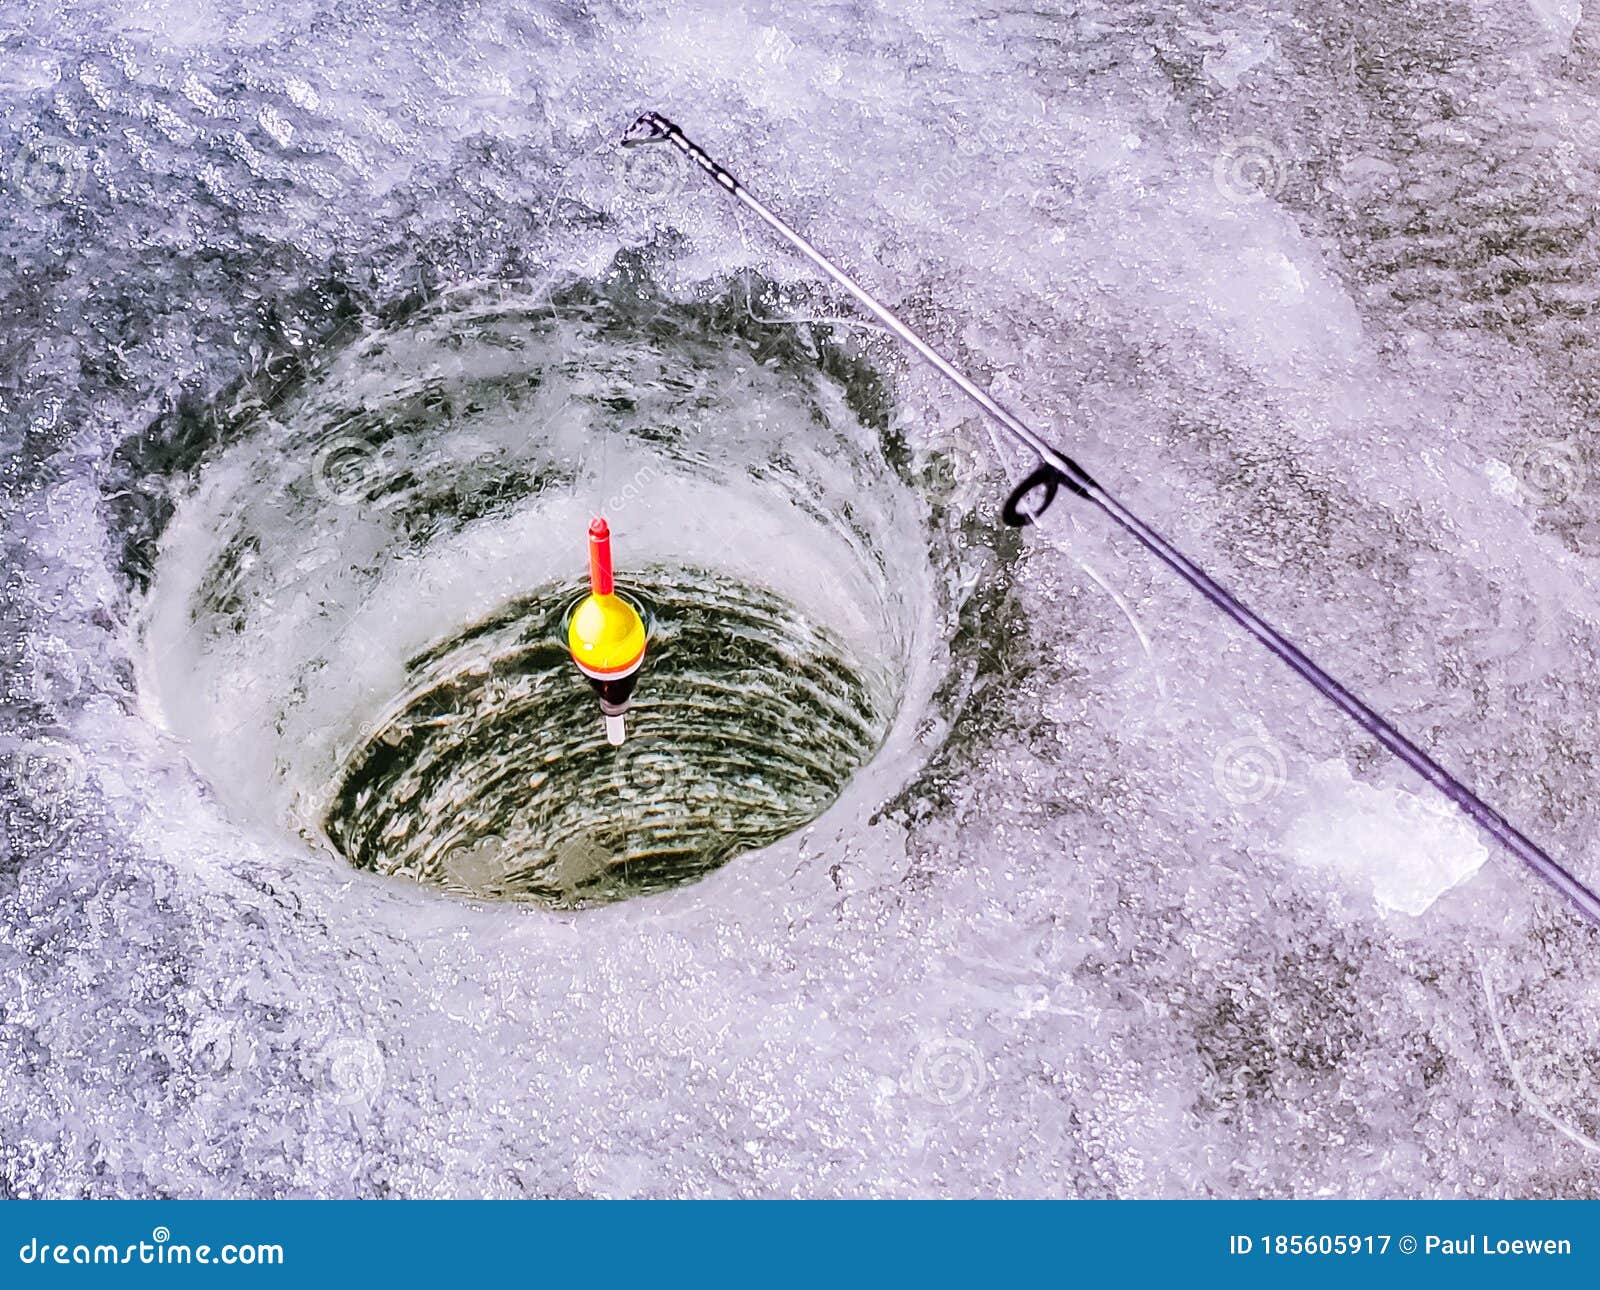 A Float Sits in a an Ice Fishing Hole. Stock Image - Image of